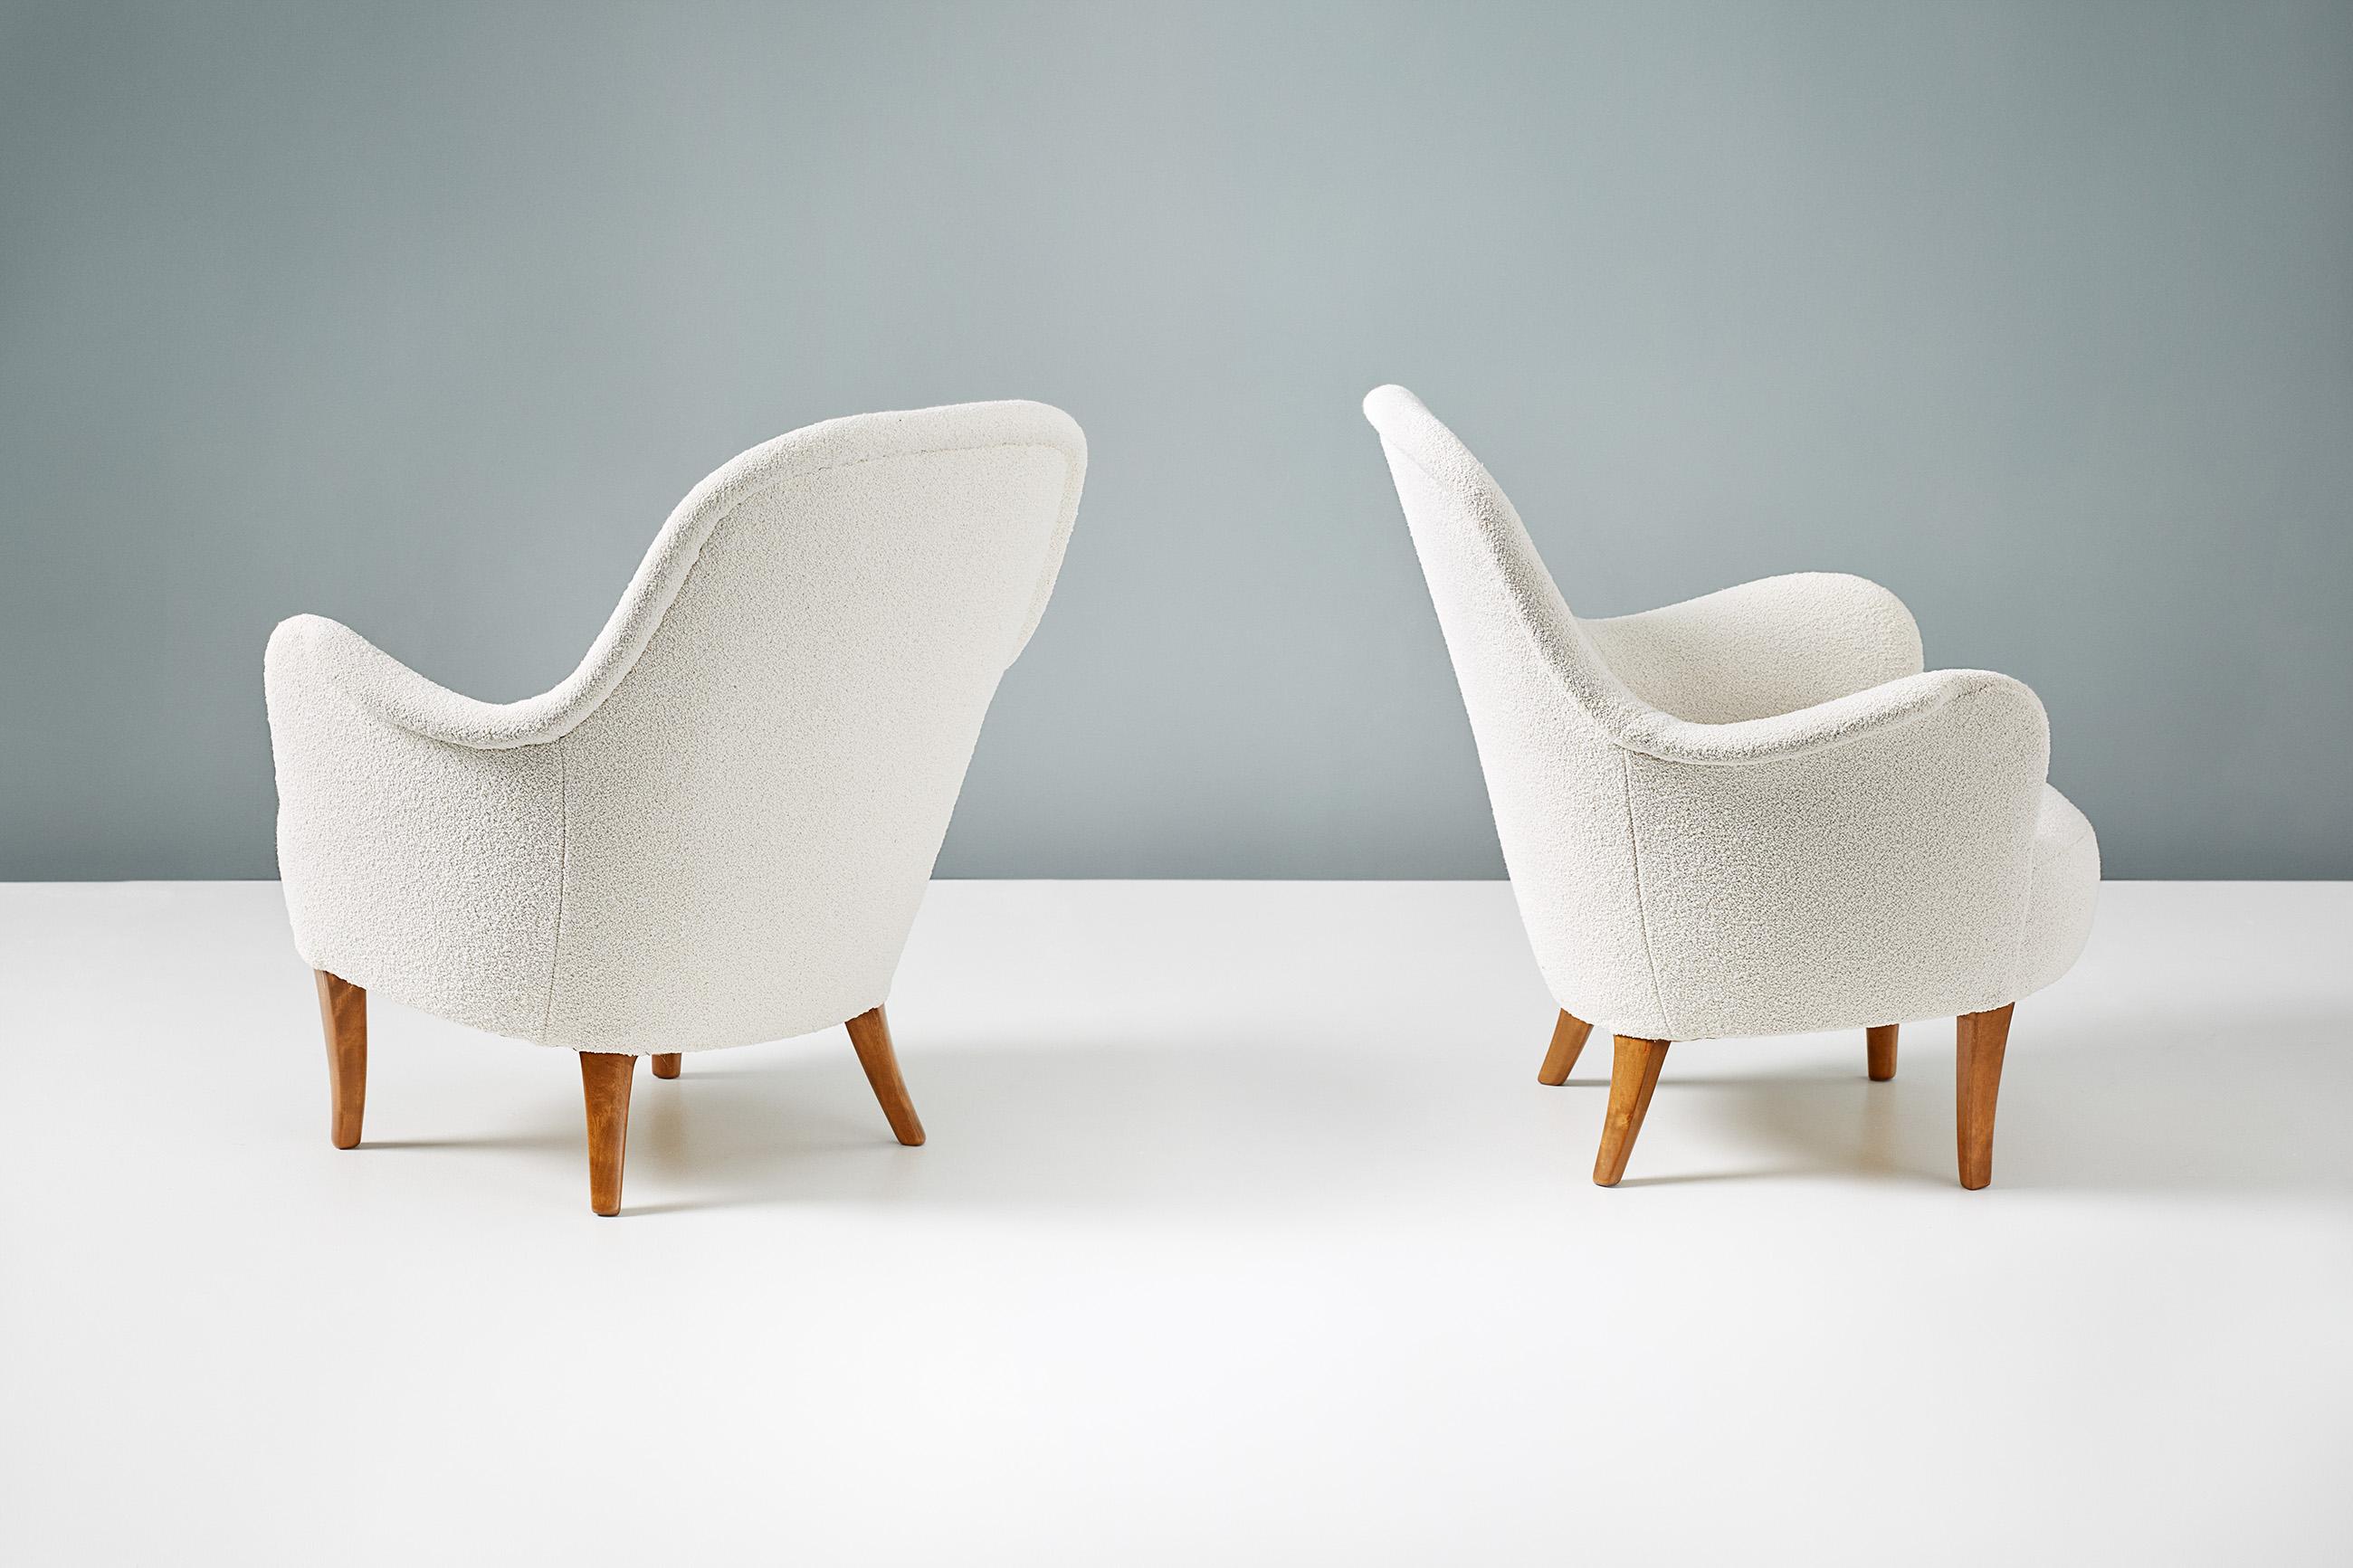 A pair of armchairs designed by Carl Malmsten in 1950s and produced in Sweden. This pair have been reupholstered in chase Erwin 'Embrace Cotton White', a luxurious off-white wool-cotton blend fabric. The legs are stained elm wood.

  